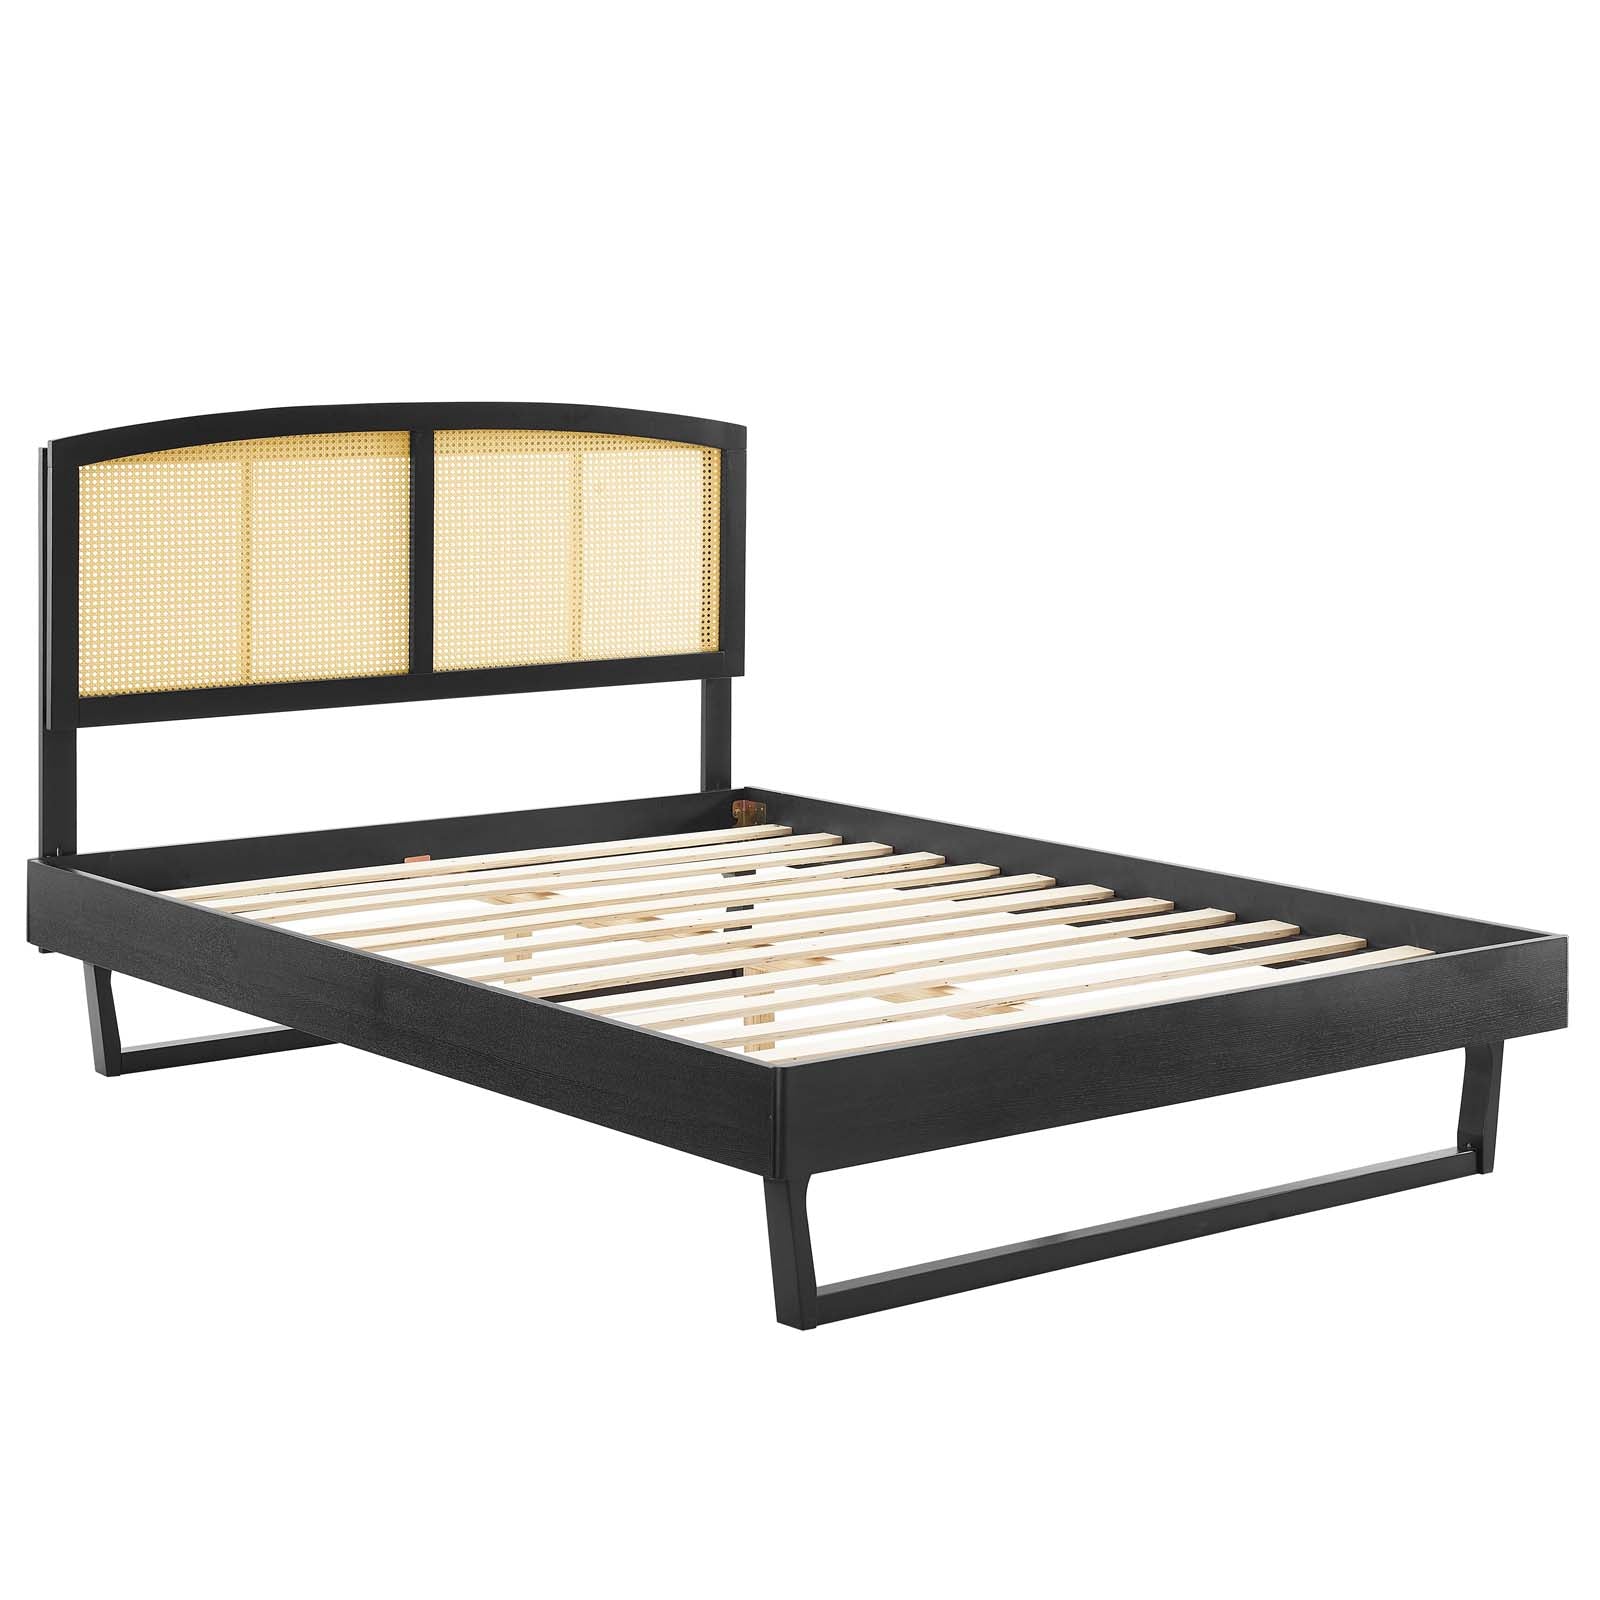 Sierra Cane and Wood King Platform Bed With Angular Legs - East Shore Modern Home Furnishings